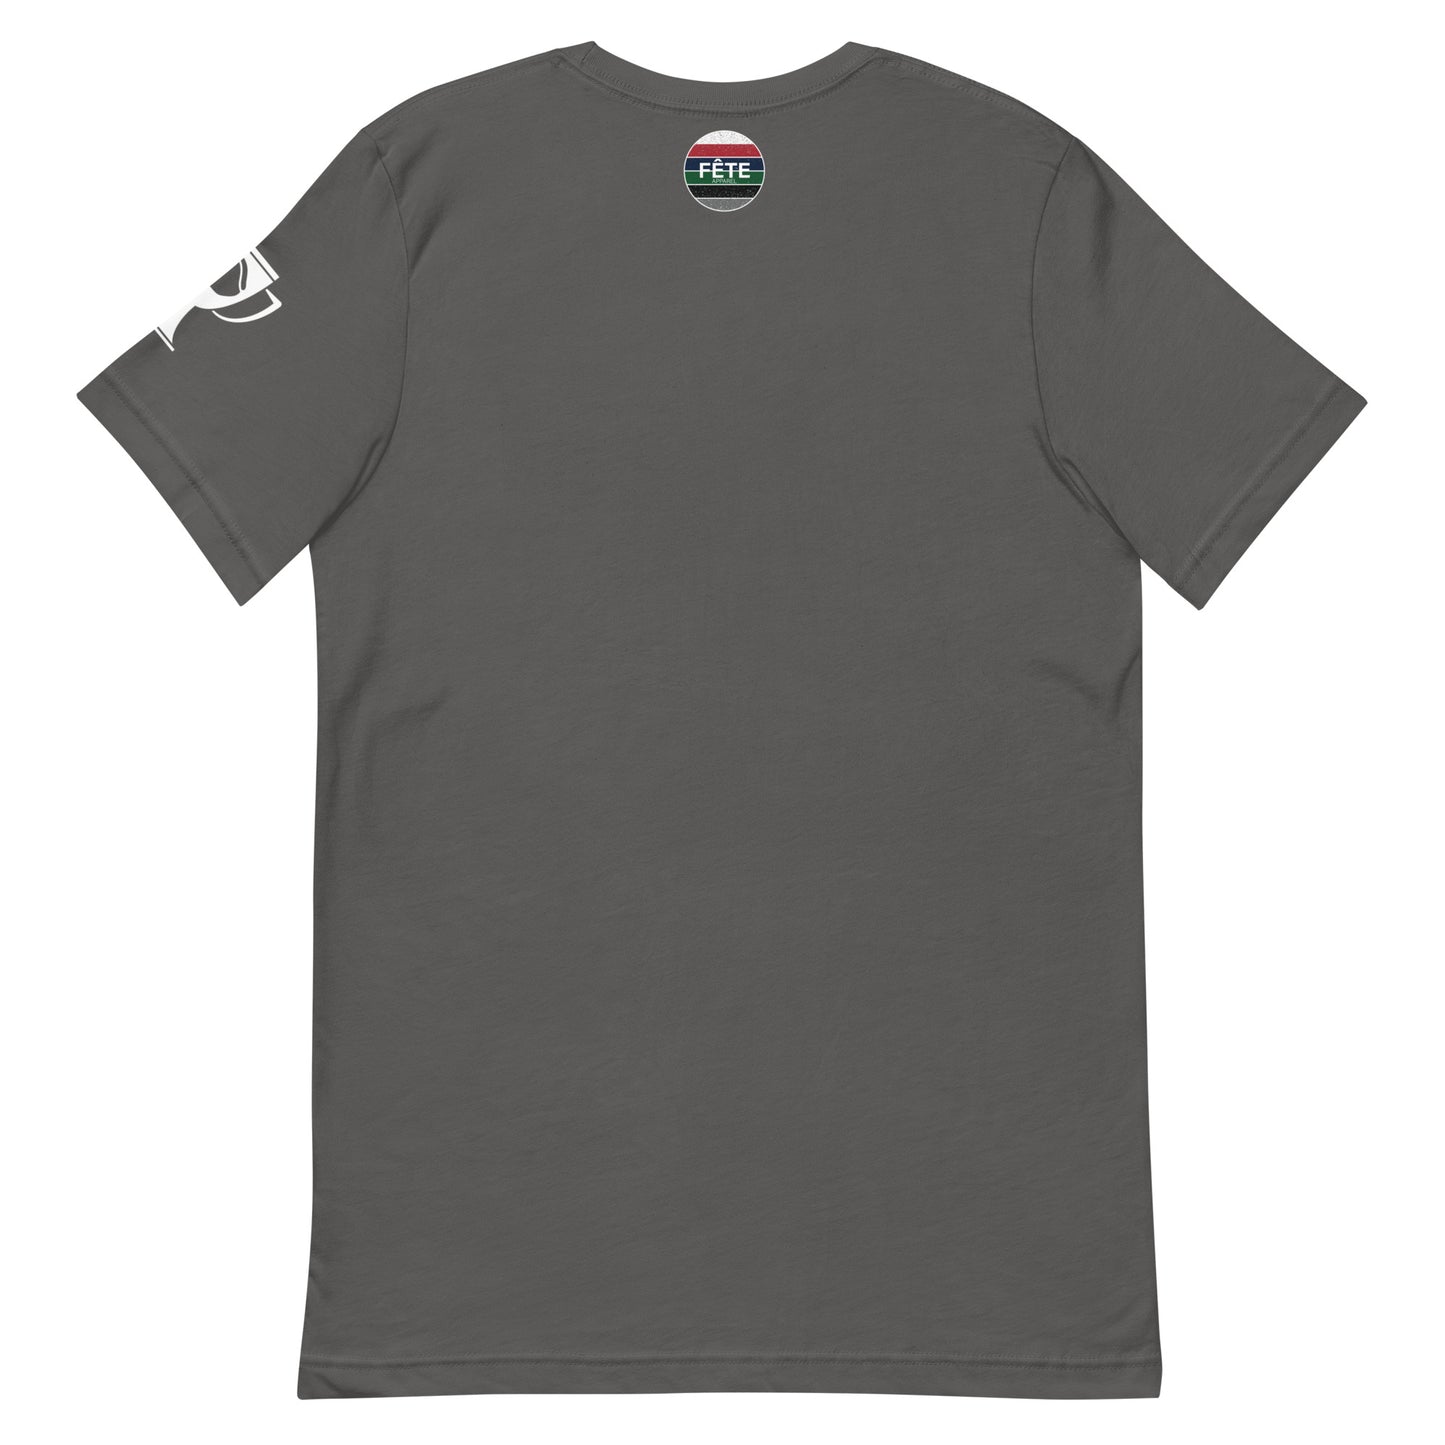 Men's T-Shirt "BARN DAD" in Basic Black, French Navy, Canadian Red, Racing Green or Storm Grey